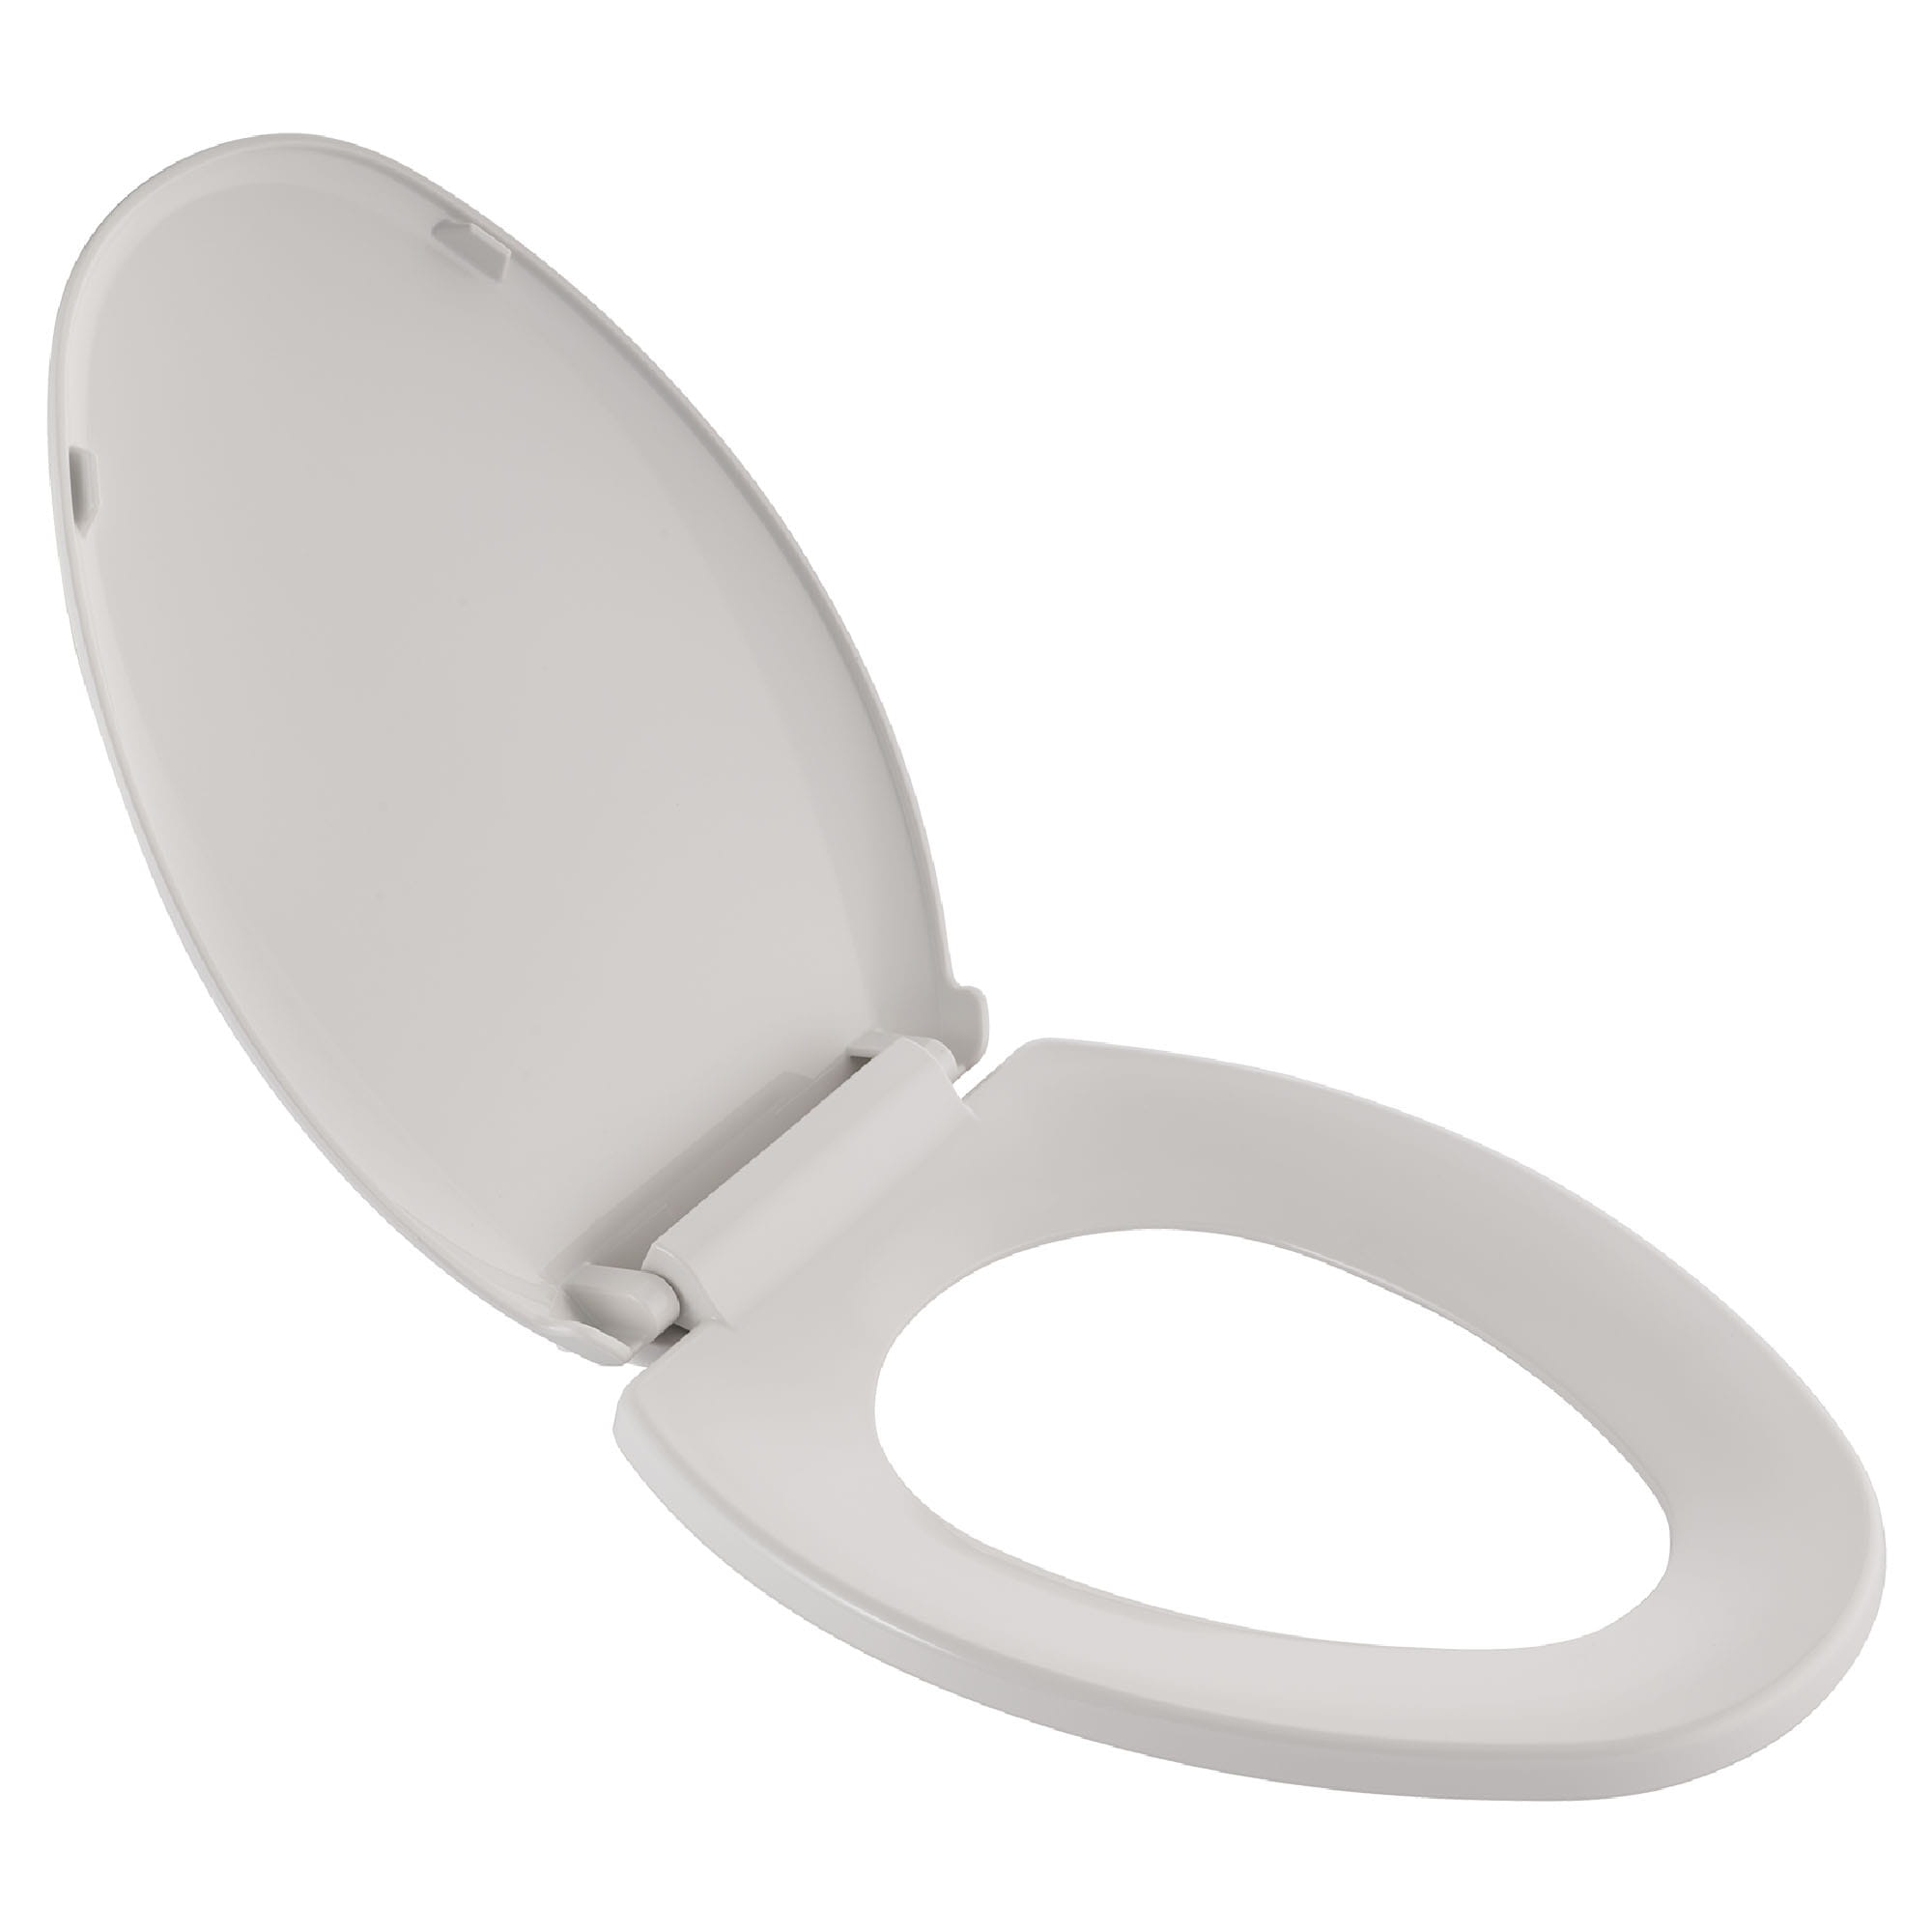 American Standard Cadet Elongated Slow Closed Toilet Seat 5257115020 for sale online 